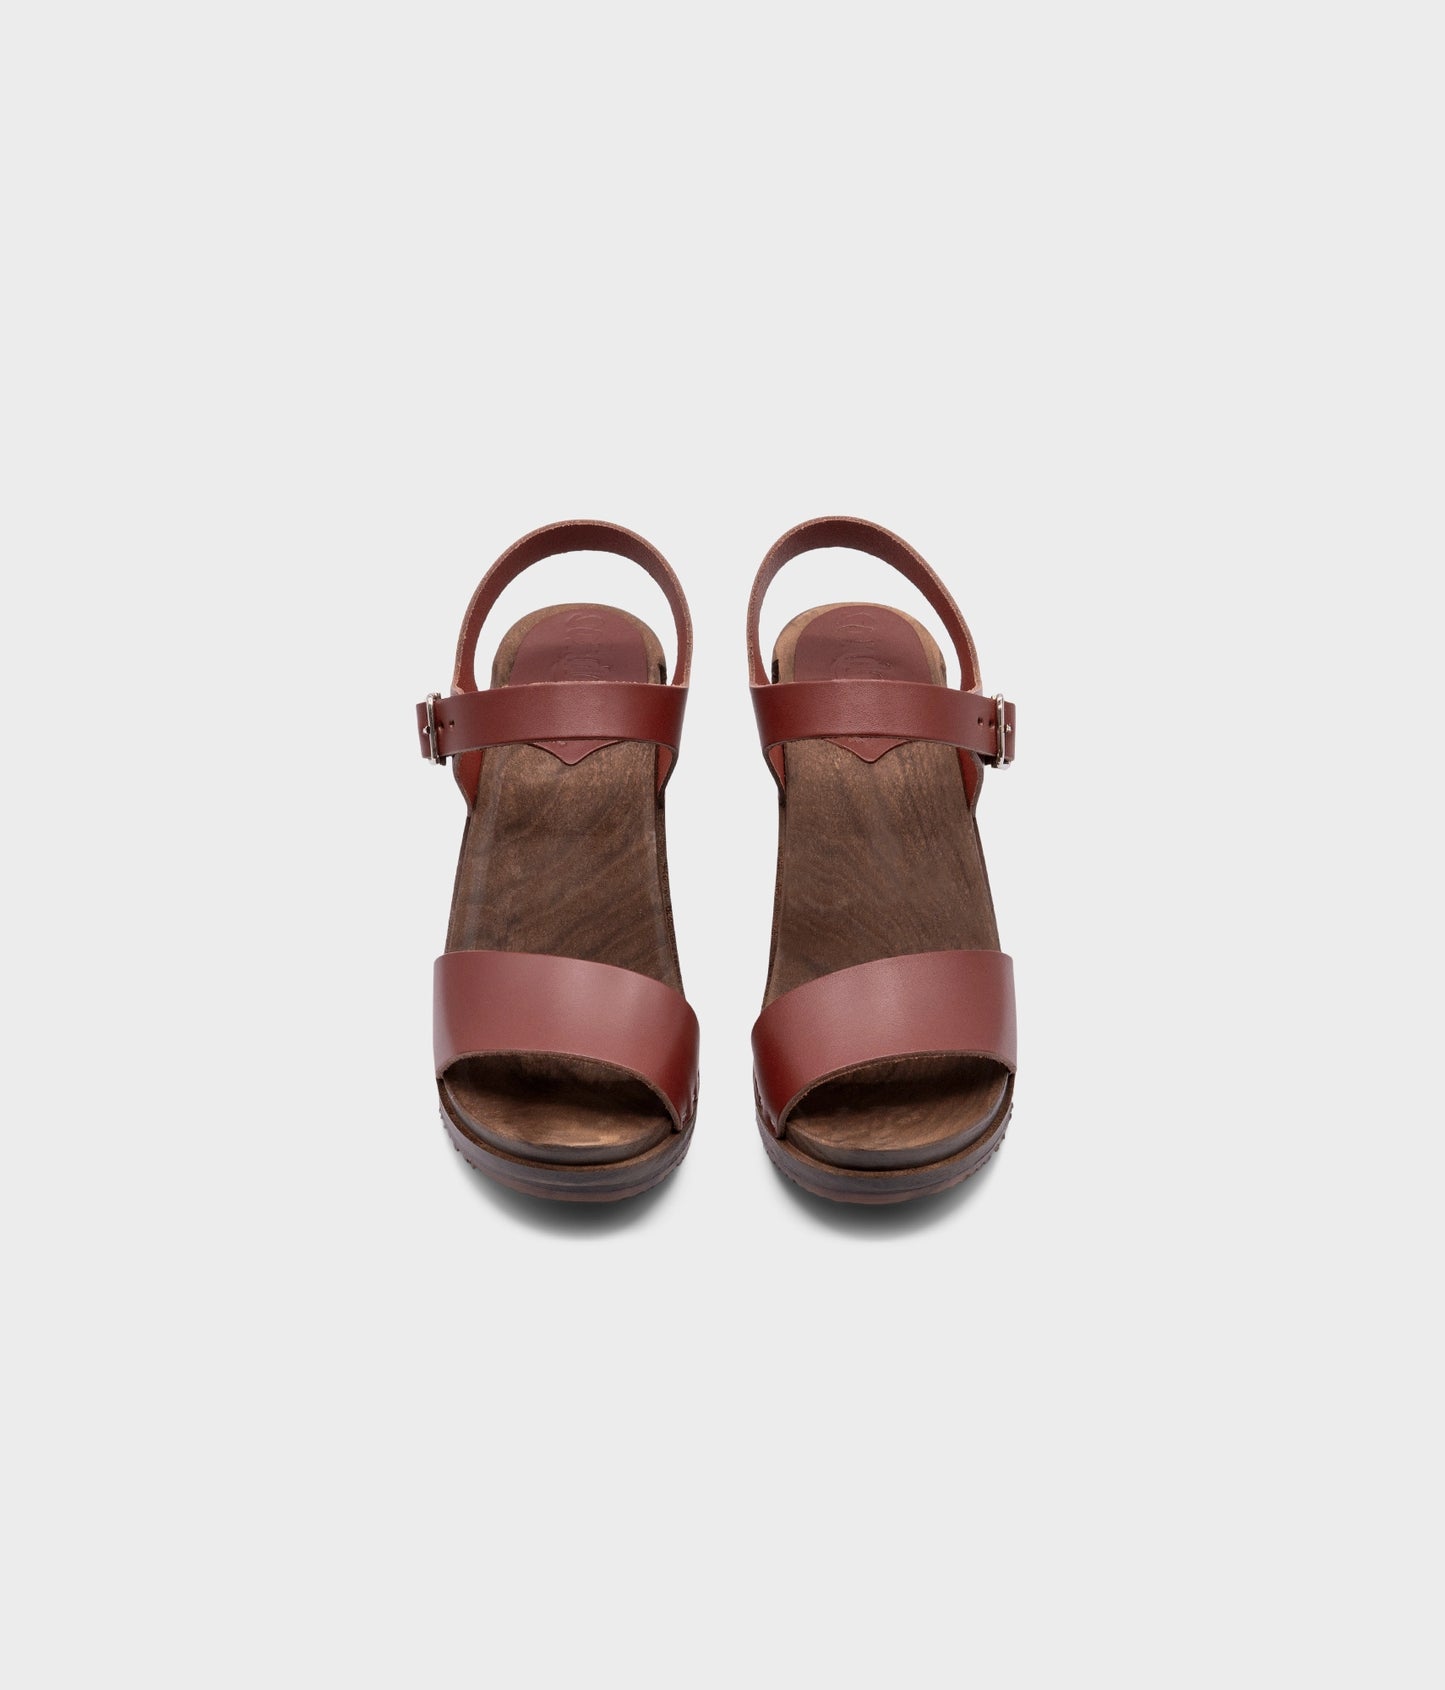 high-heeled open-toe clog sandal in cognac red vegetable tanned leather stapled on a dark wooden base